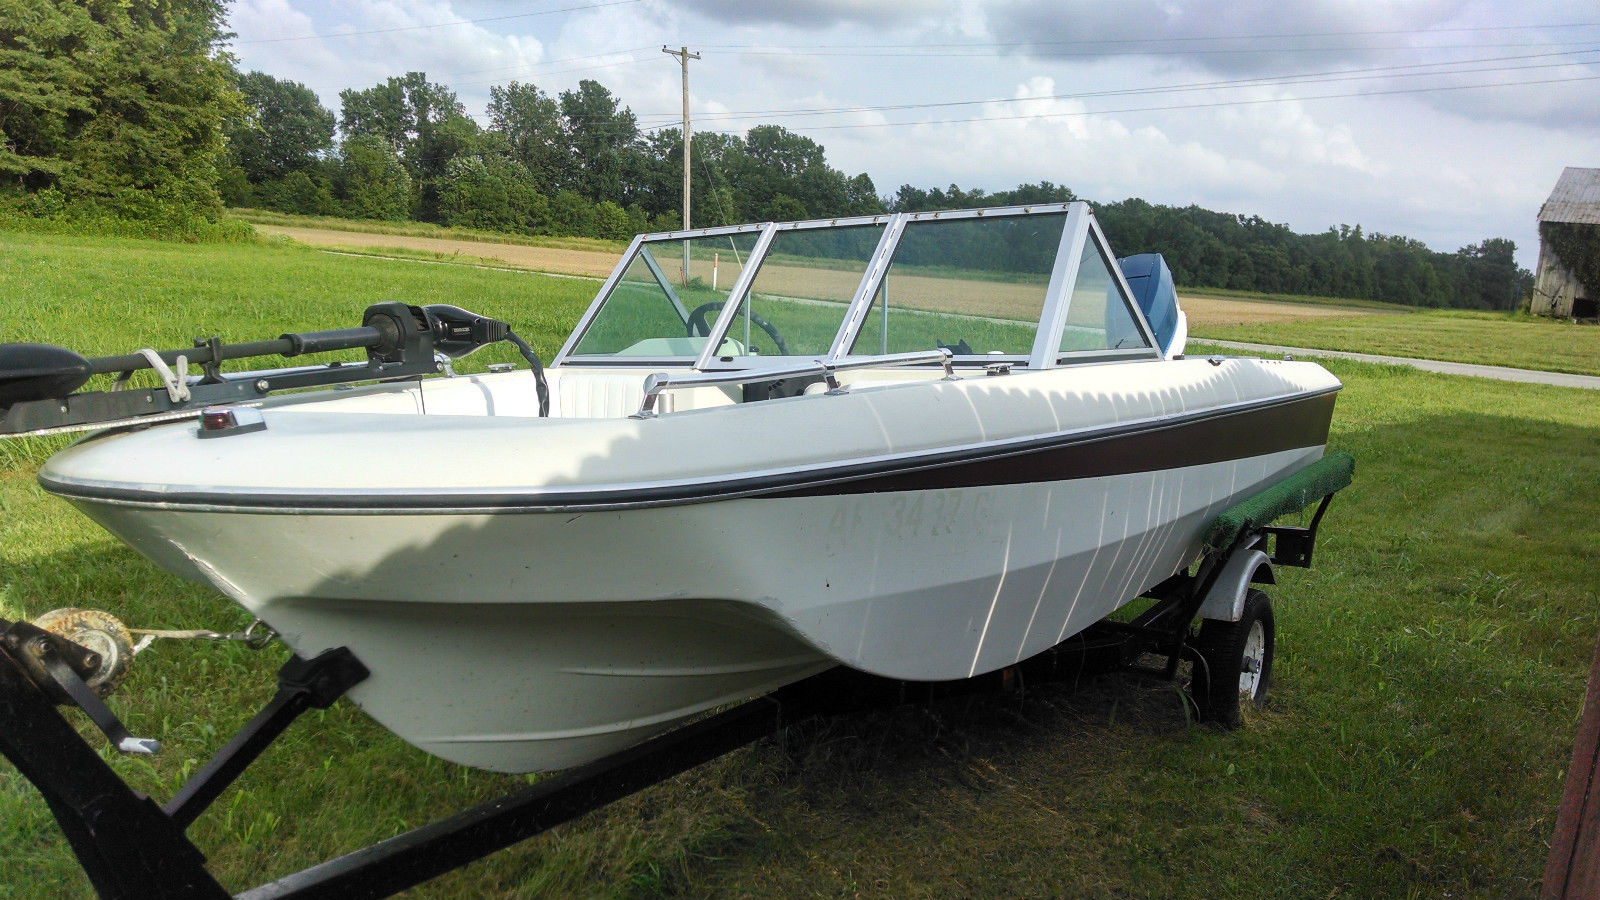 Charger Boat Newman 1979 for sale for $1,000 - Boats-from ...